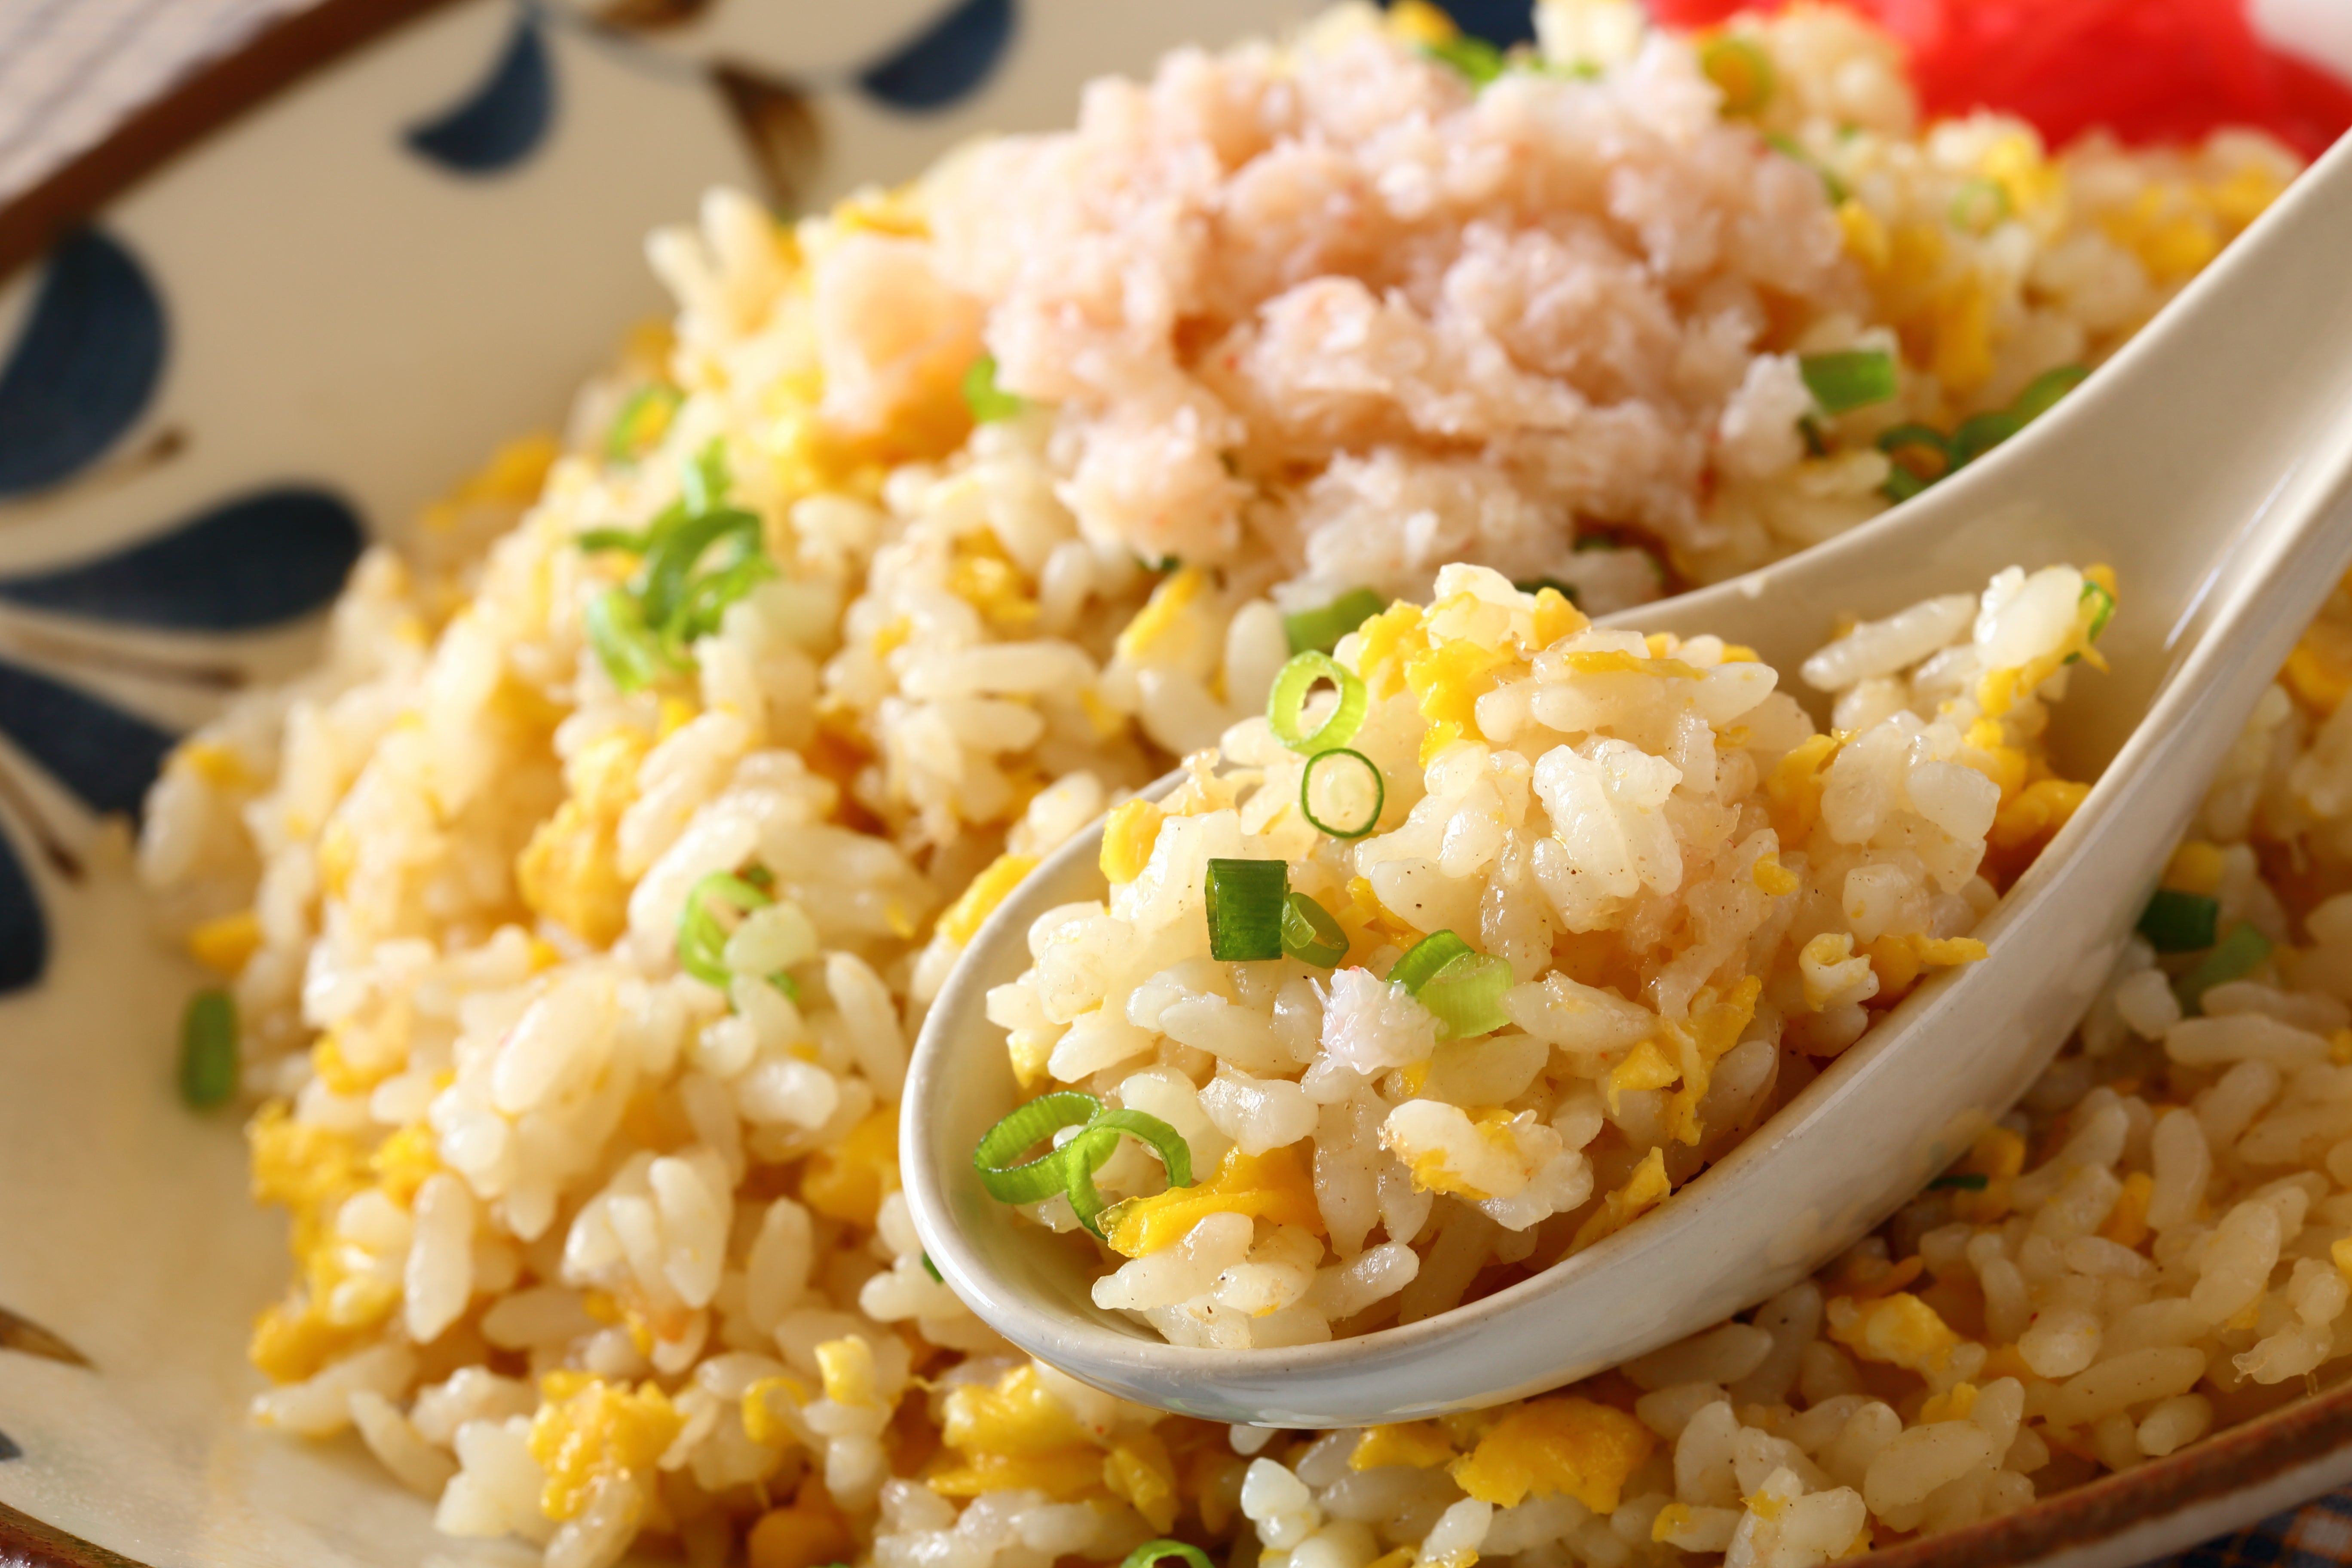 what to serve with fried rice